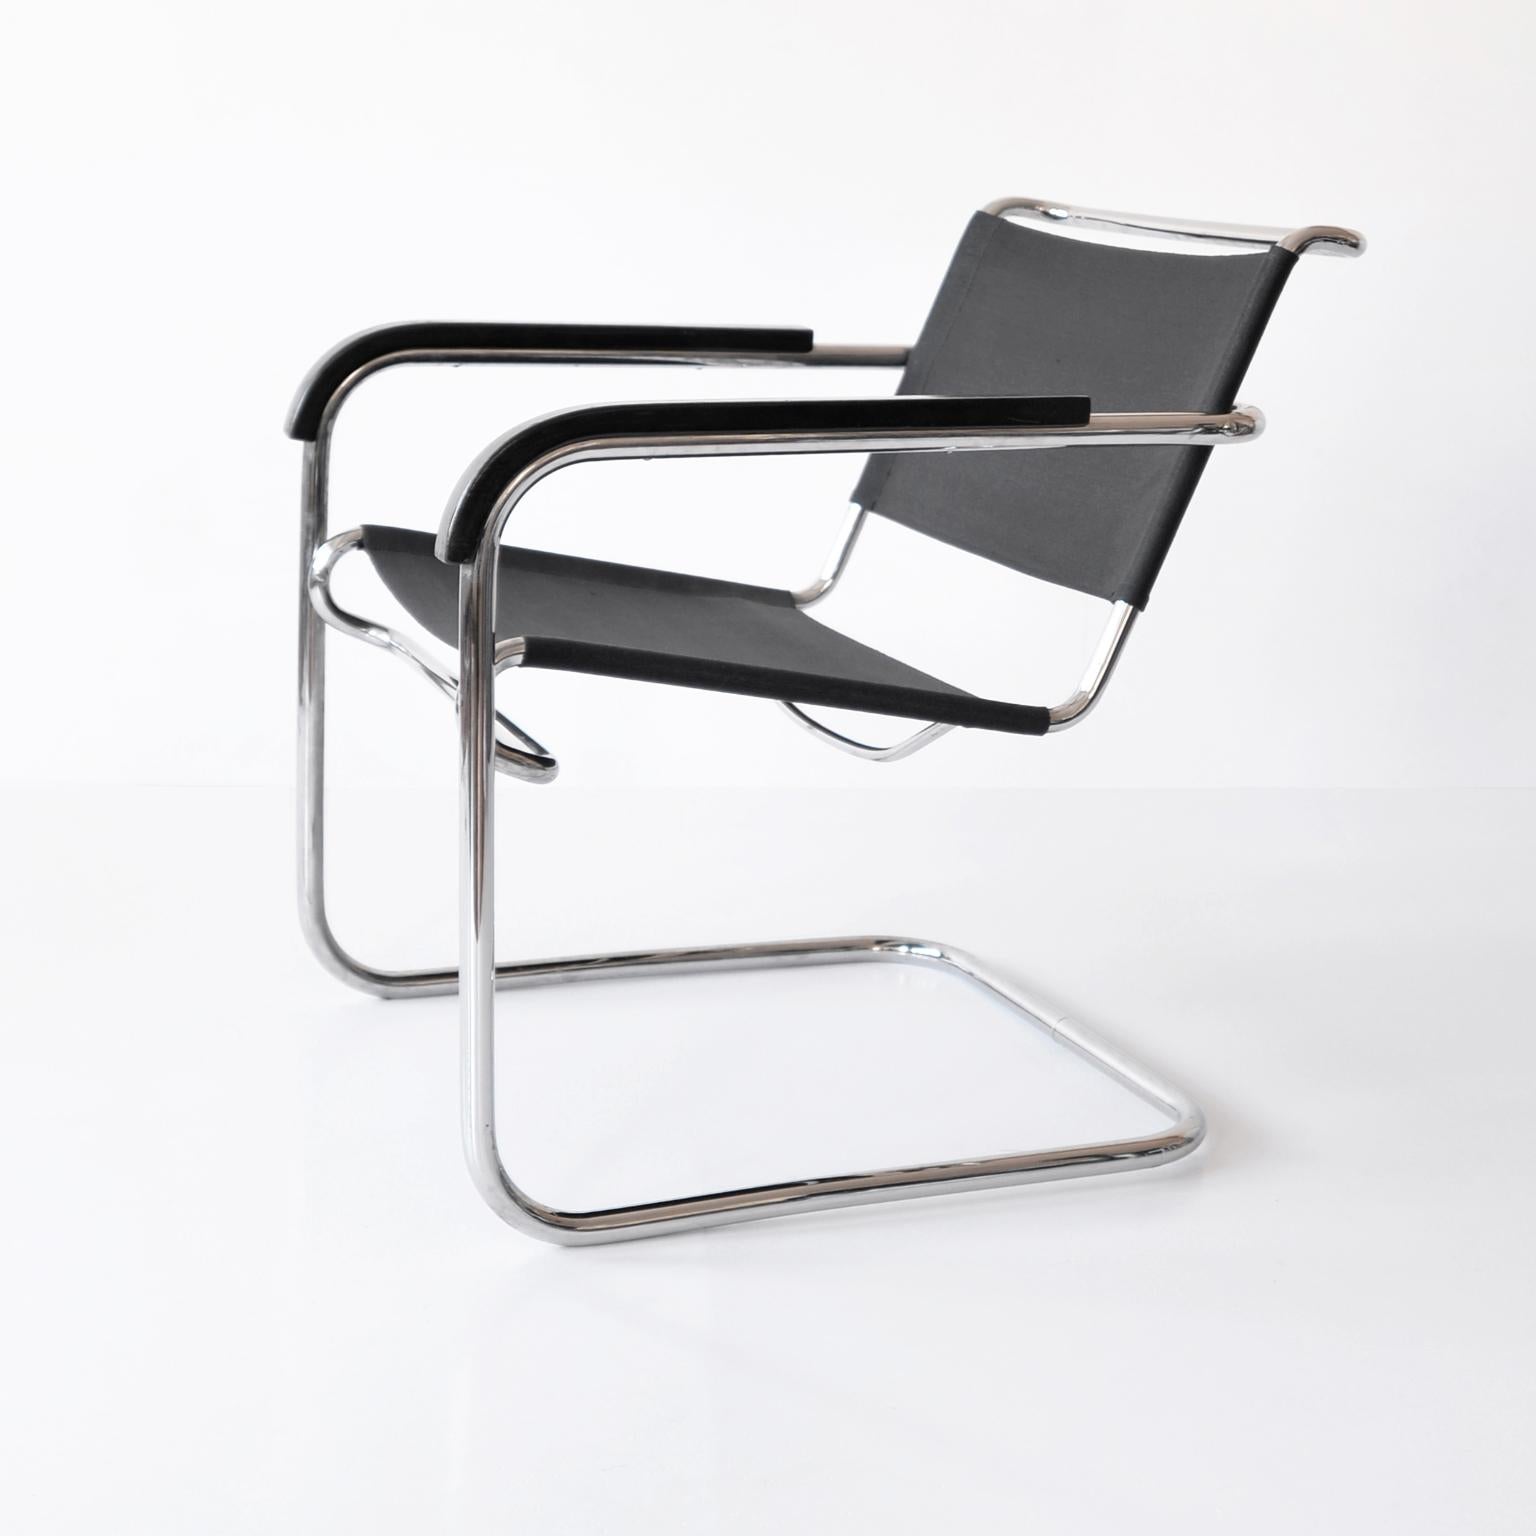 Anton Lorenz chrome-plated tubular steel cantilever armchair model KS 41, manufactured by Thonet AG Frankenberg, circa 1935.
The armchair was partially restored, the general vintage condition is good.